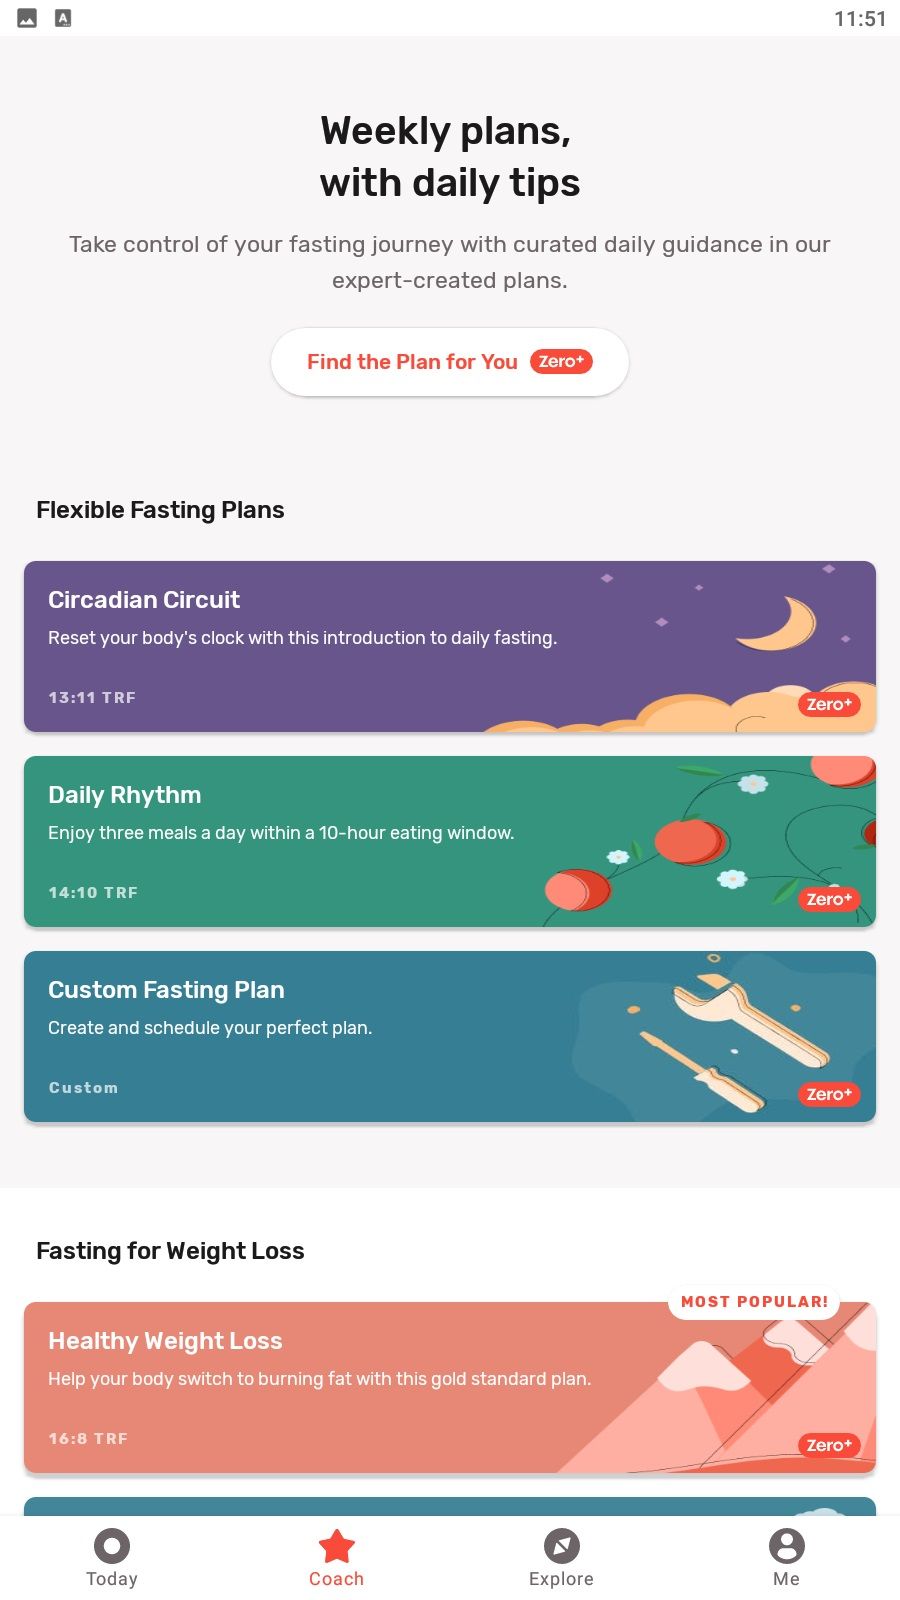 Fasting tips and guides on the Zero app